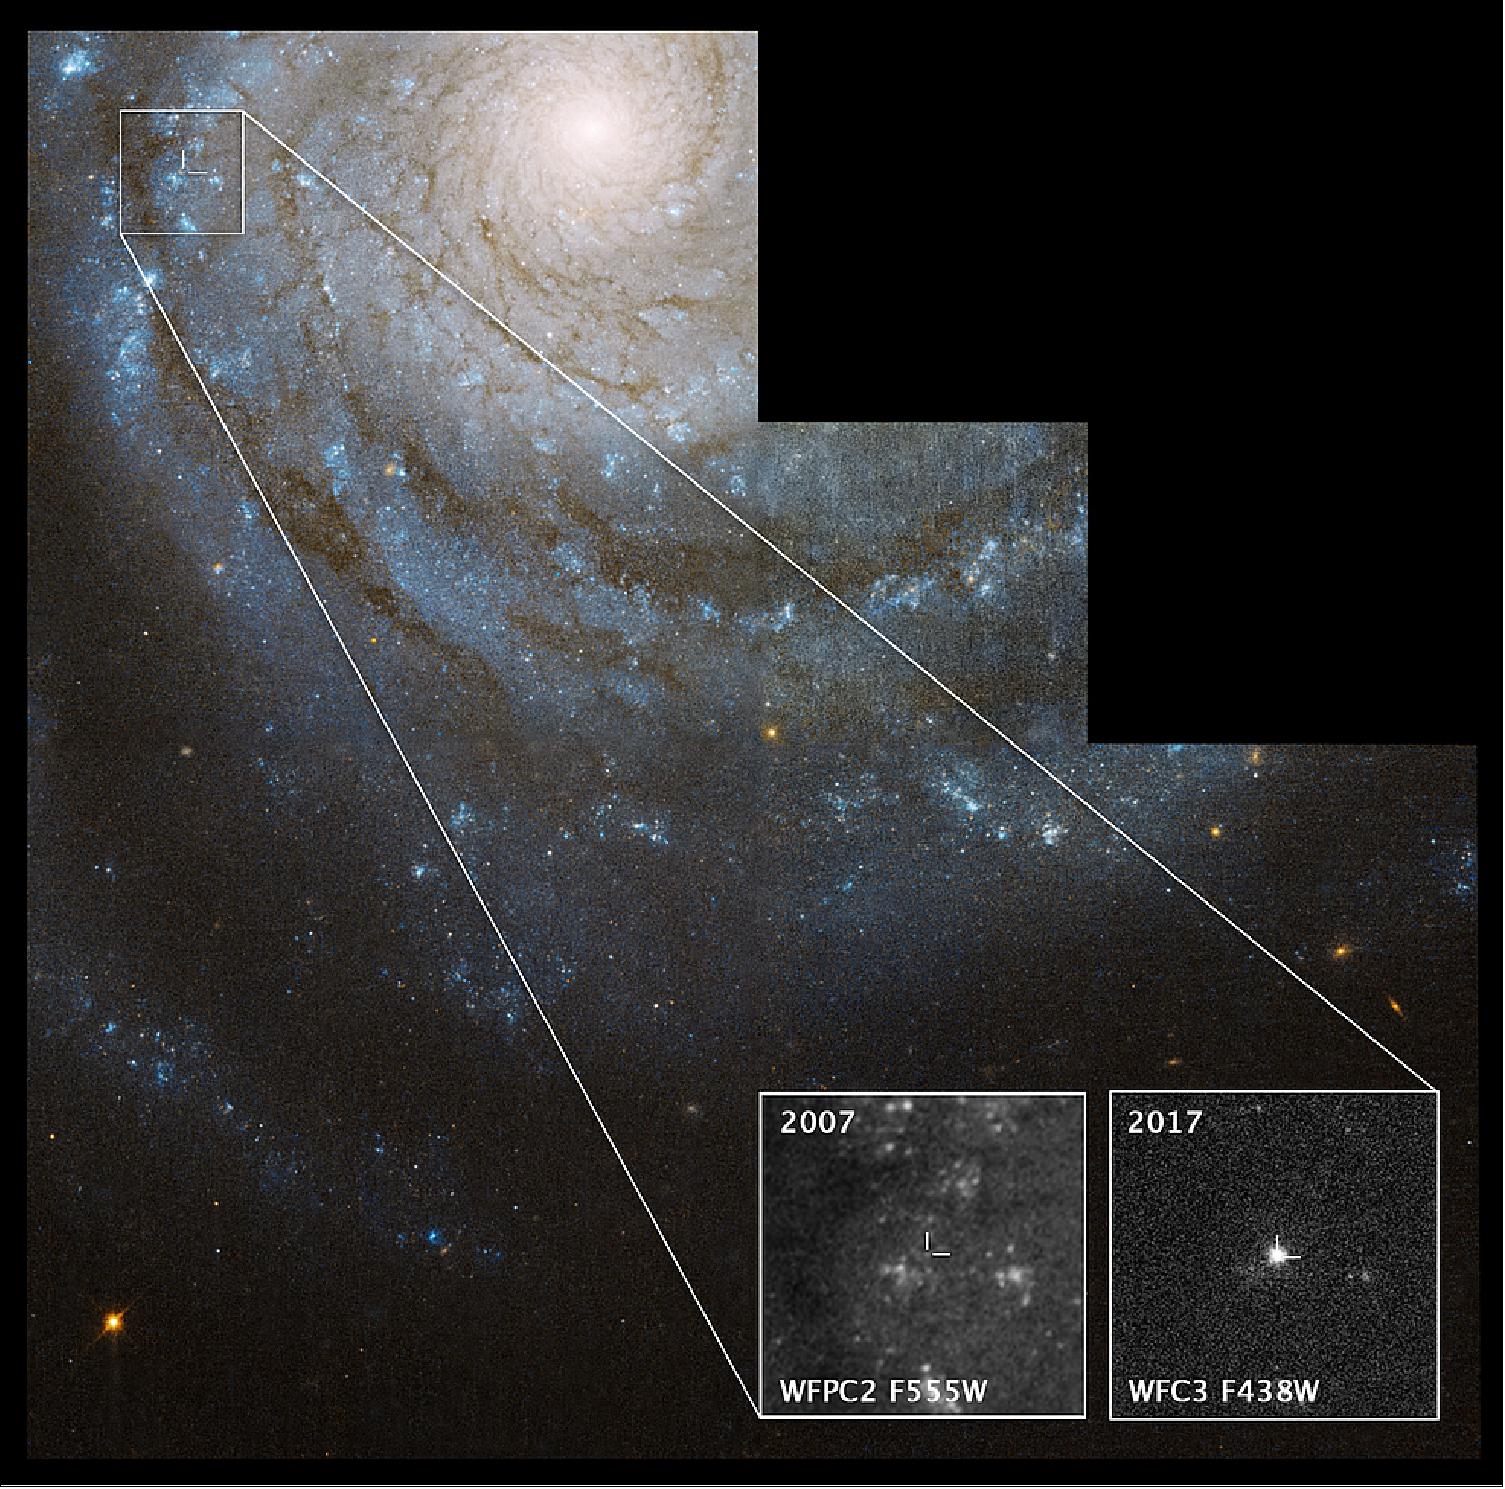 Figure 8: This NASA Hubble Space Telescope image of the nearby spiral galaxy NGC 3938 shows the location of supernova 2017ein, in a spiral arm near the bright core. The exploded star is a Type Ic supernova, thought to detonate after its massive star has shed or been stripped of its outer layers of hydrogen and helium. Progenitor stars to Type Ic supernovas have been hard to find. But astronomers sifting through Hubble archival images may have uncovered the star that detonated as supernova 2017ein. The location of the candidate progenitor star is shown in the left pullout box at the bottom, taken in 2007. The bright object in the box at bottom right is a close-up image of the supernova, taken by Hubble in 2017, shortly after the stellar blast. NGC 3938 resides 65 million light-years away in the constellation Ursa Major. The Hubble image of NGC 3938 was taken in 2007 [image credits: NASA, ESA, S. Van Dyk (Caltech), and W. Li (University of California)]